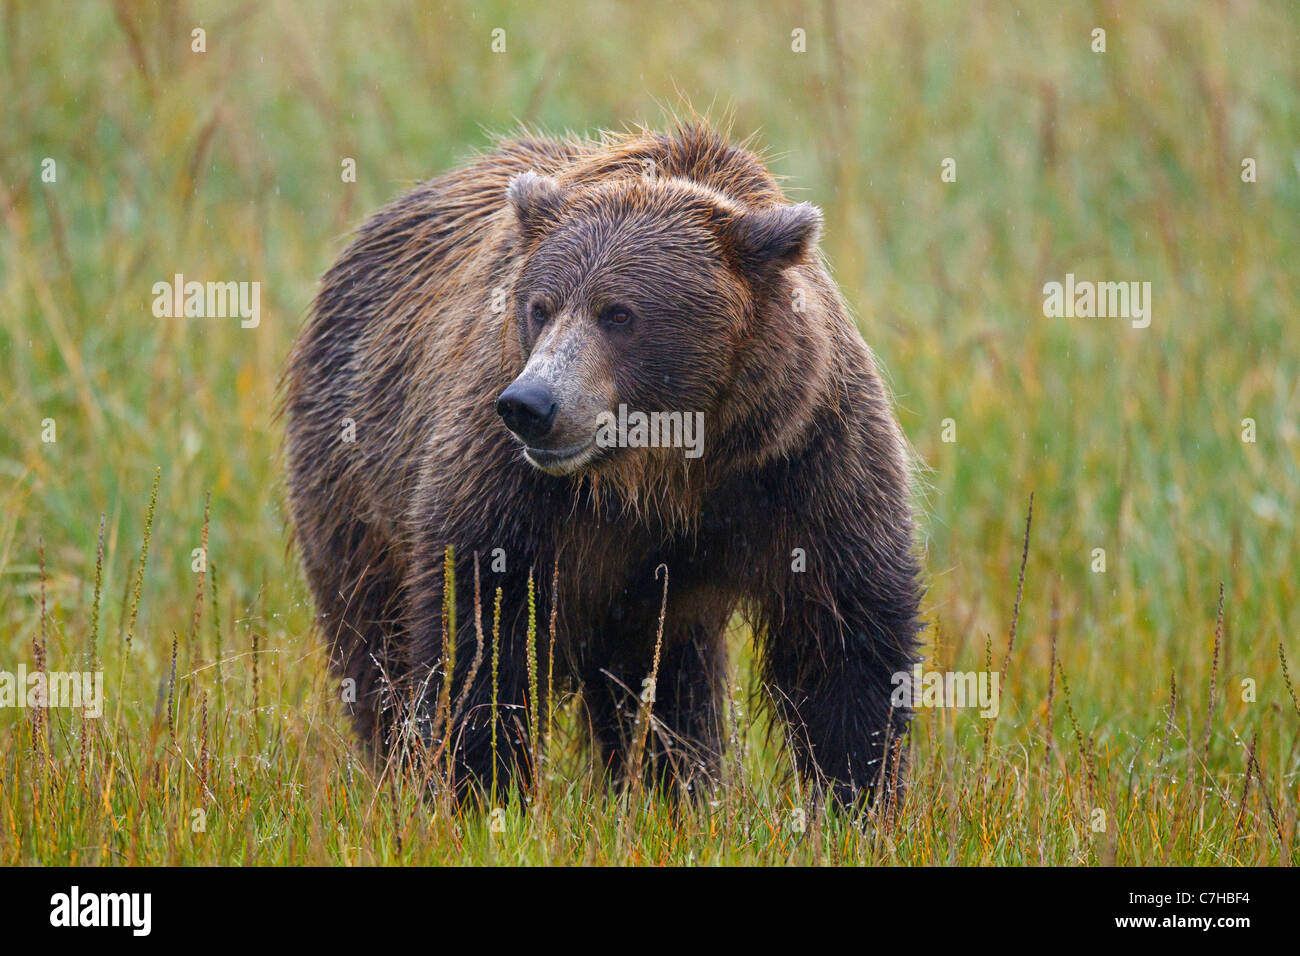 North American brown bear (Ursus arctos horribilis) sow stands in field, Lake Clark National Park, Alaska, United States Stock Photo